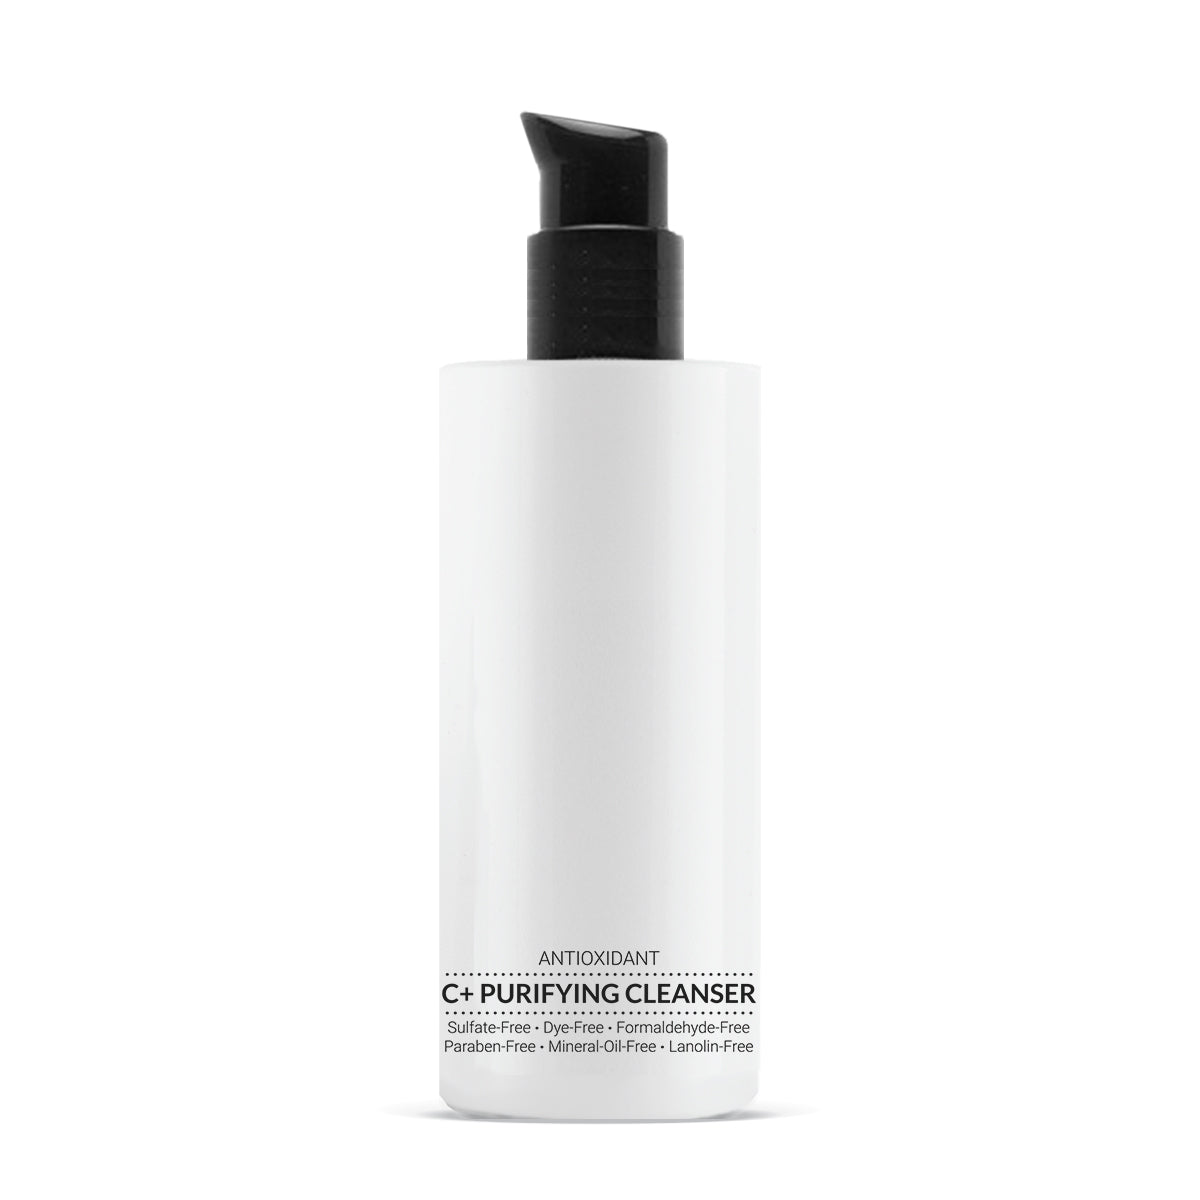 C+ Purifying Cleanser